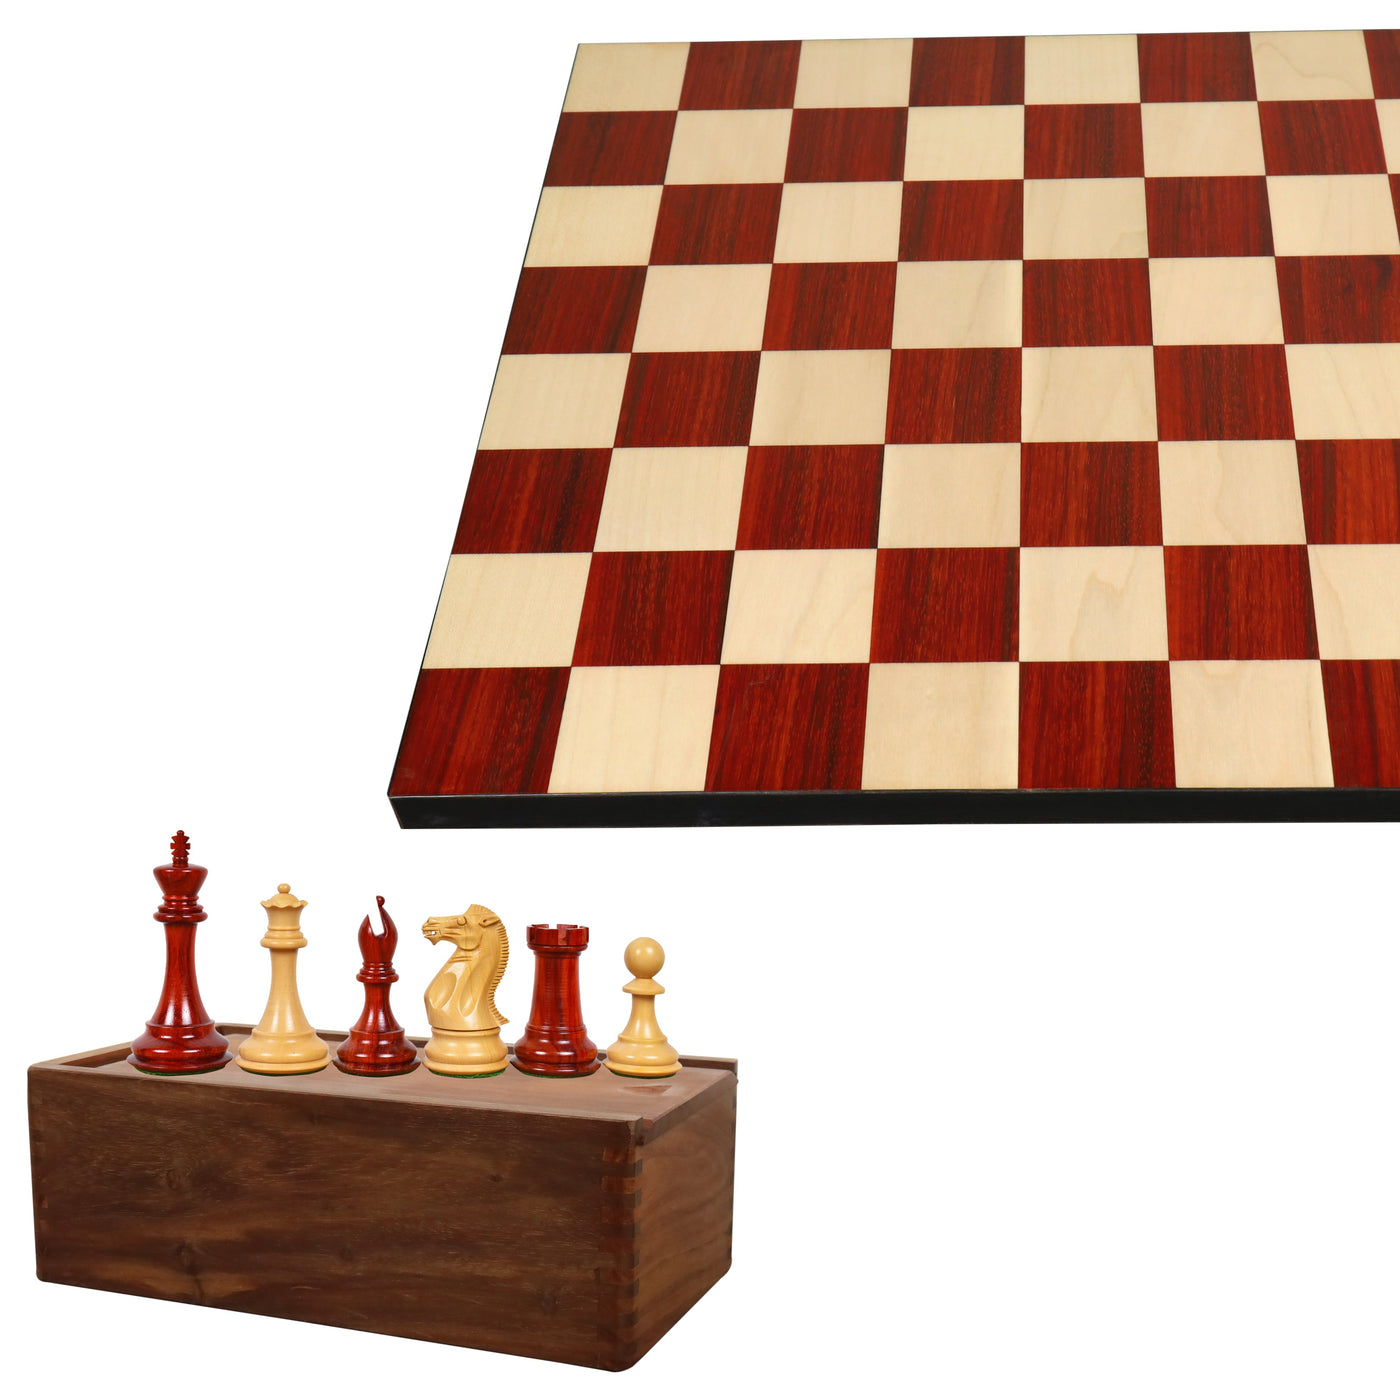 Combo of 4" Sleek Staunton Luxury Chess Set - Pieces in Bud Rose Wood with Board and Box